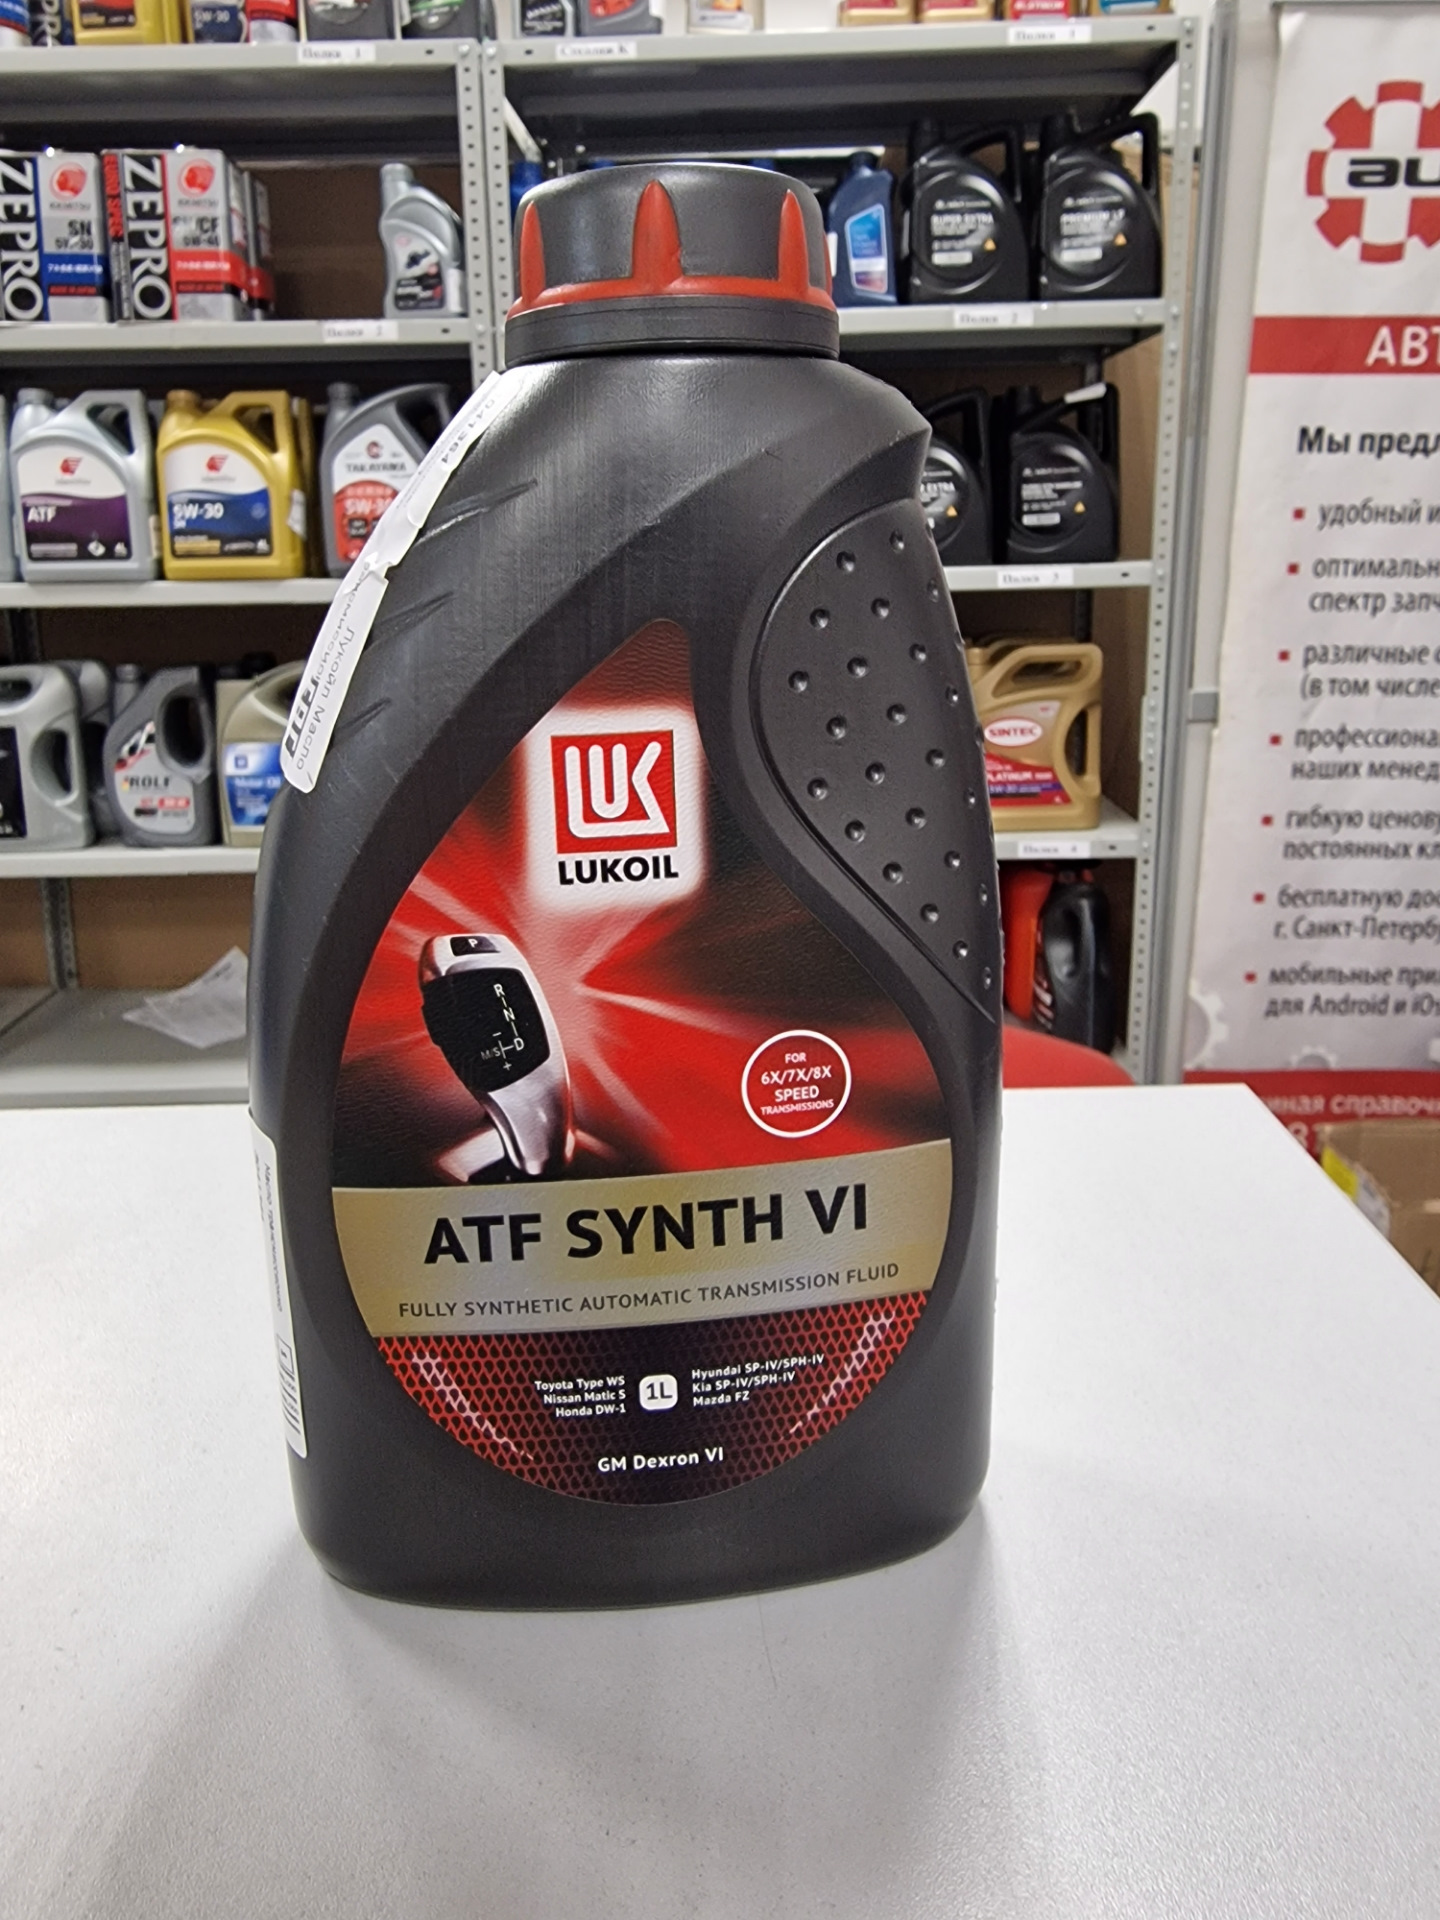 Atf synth vi. ATF SP-IV Lukoil. ZIC ATF Synth vi. ZIC ATF Synth vi или Лукойл ATF Synth 6.